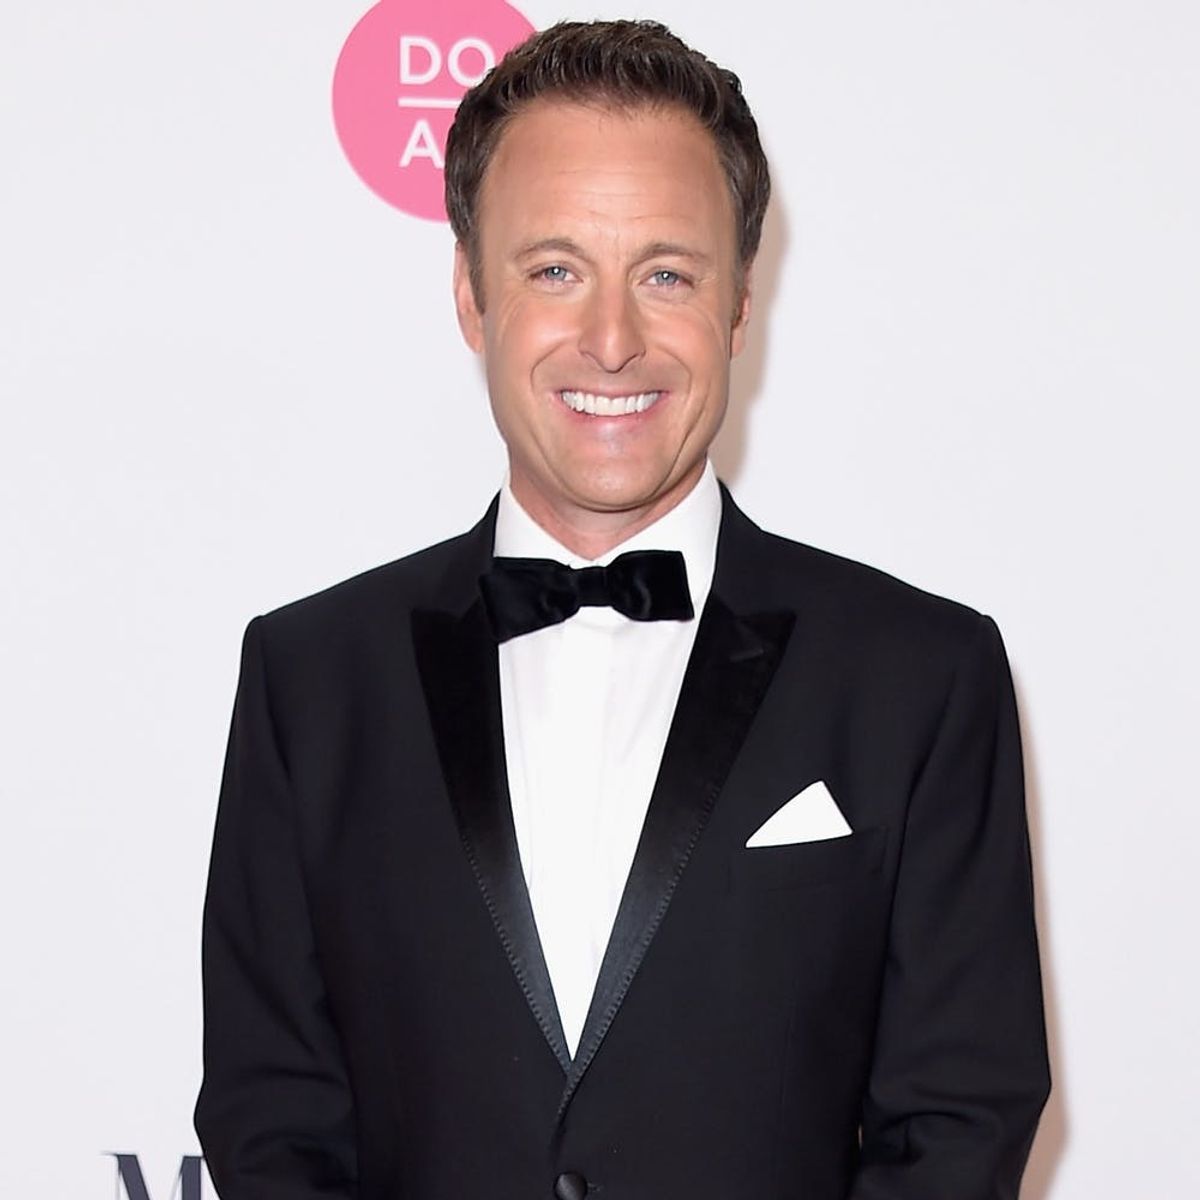 Chris Harrison Teases New Details About the “Bachelor: Winter Games” Spinoff